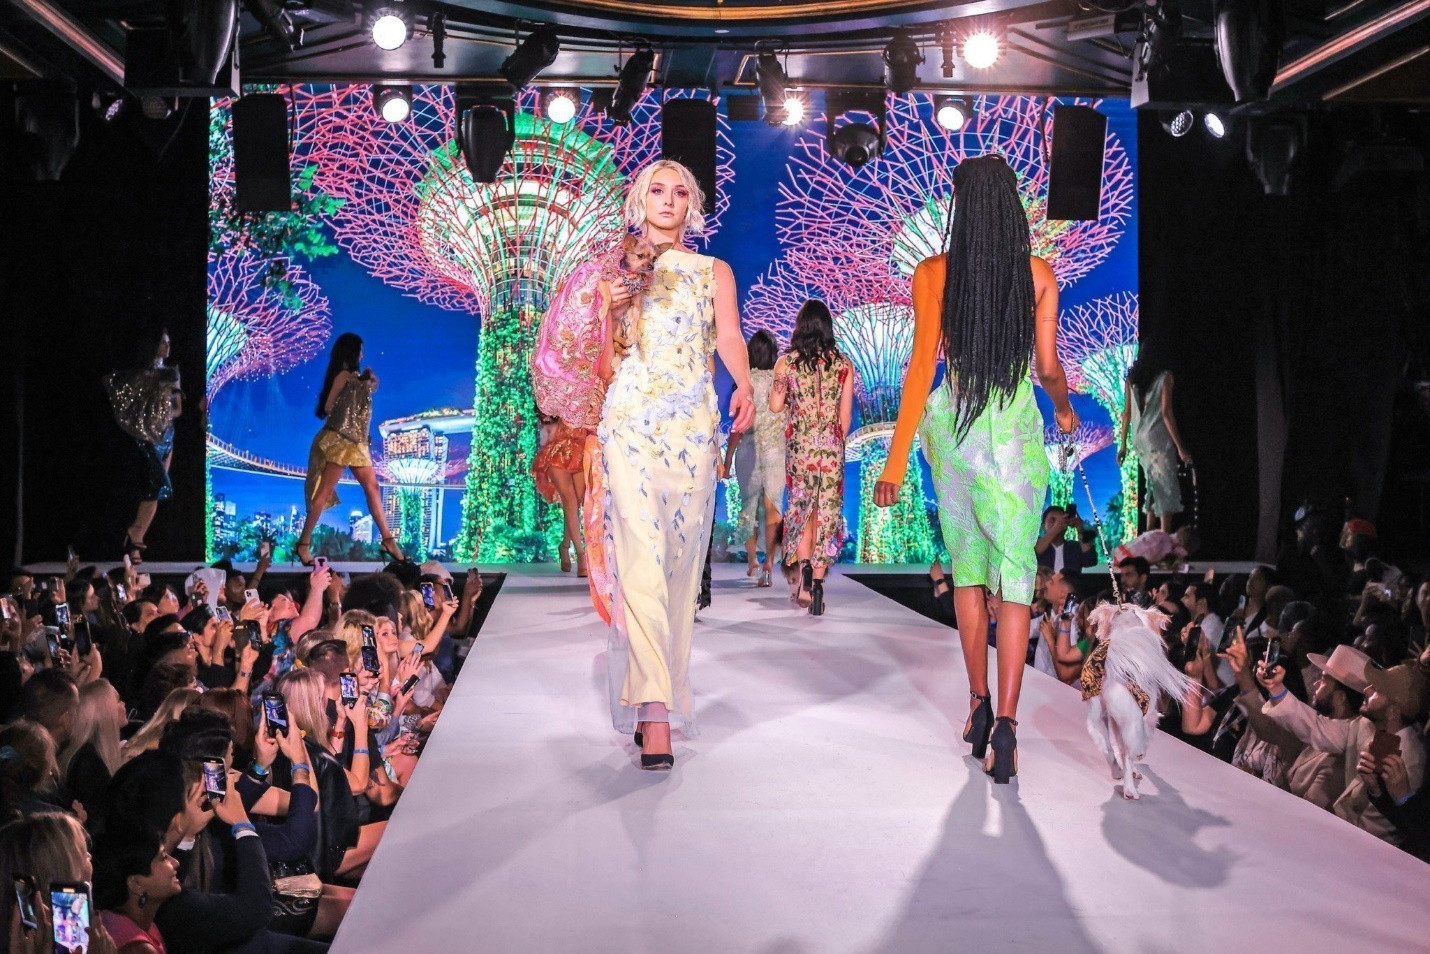 A group of women walking on a runway

Description automatically generated with medium confidence